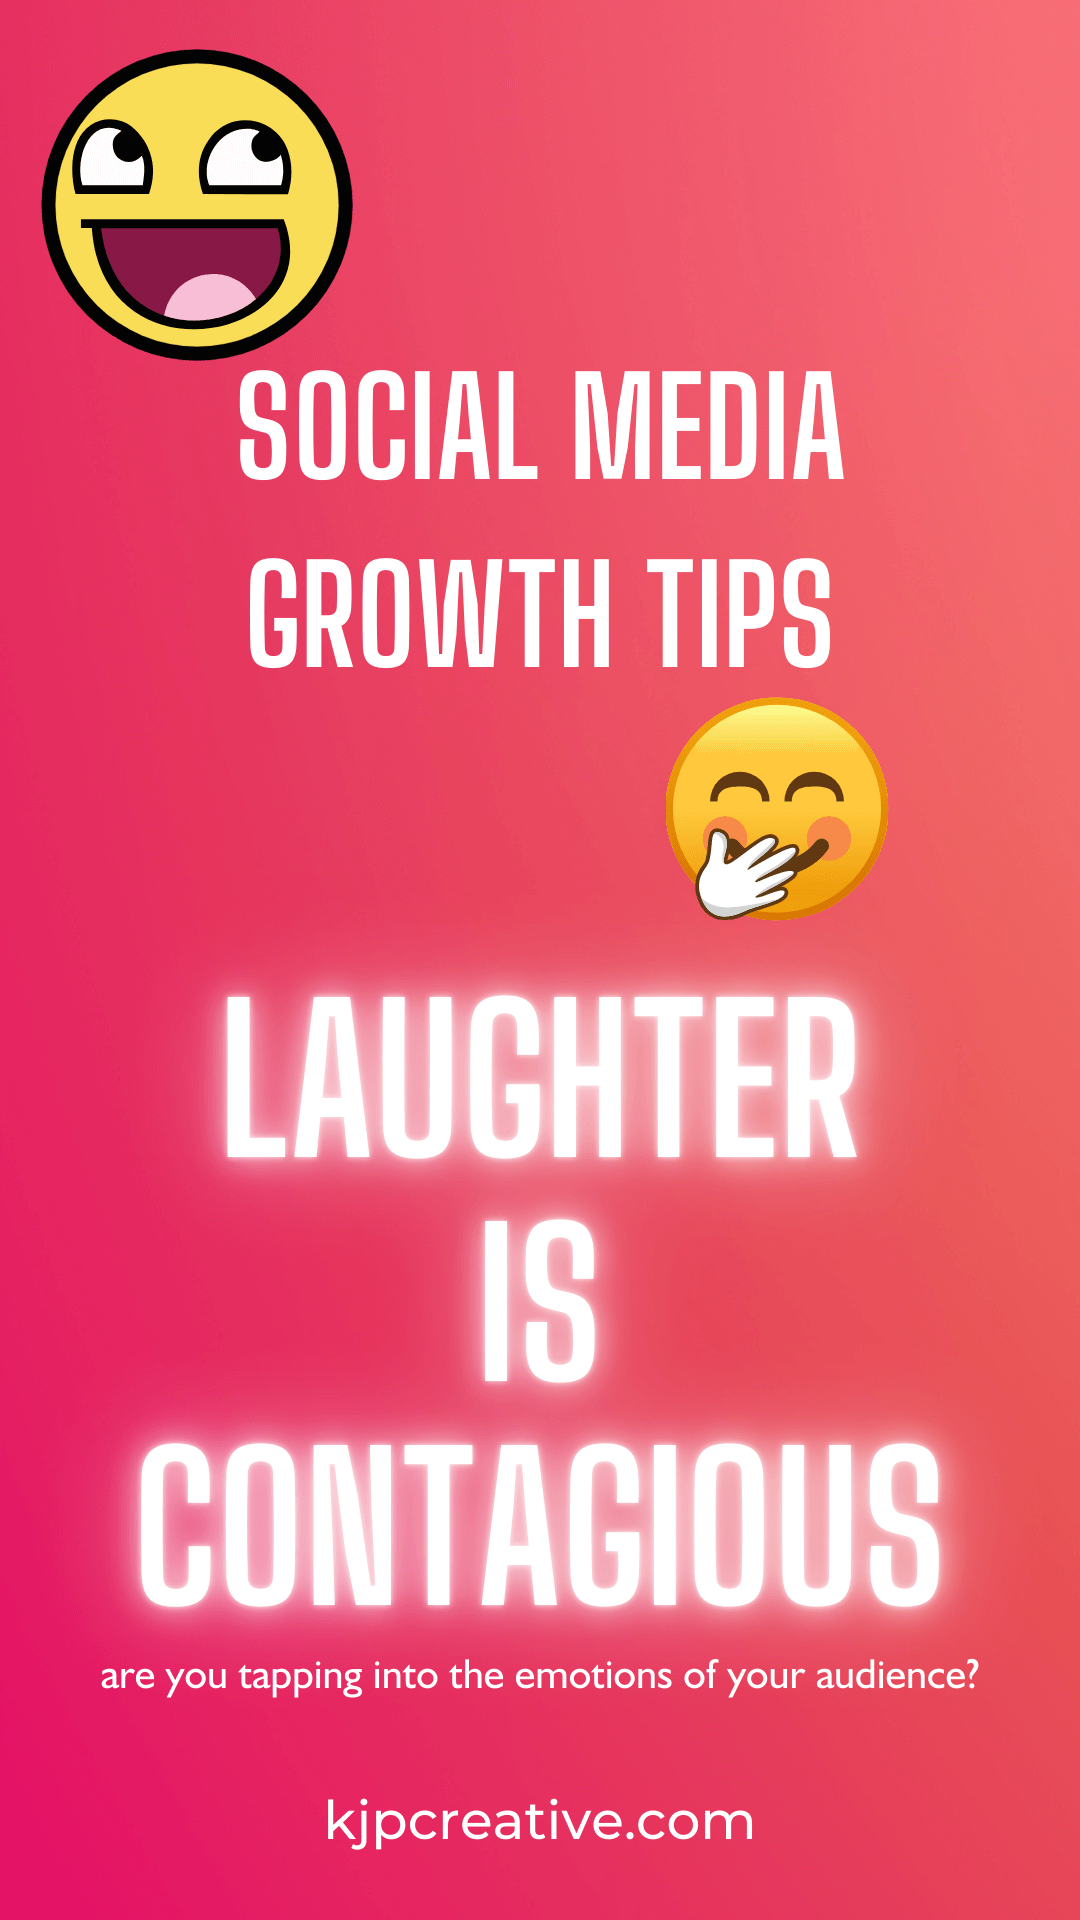 Grow your social media channels by tapping into the emotions of your readers - make them laugh!